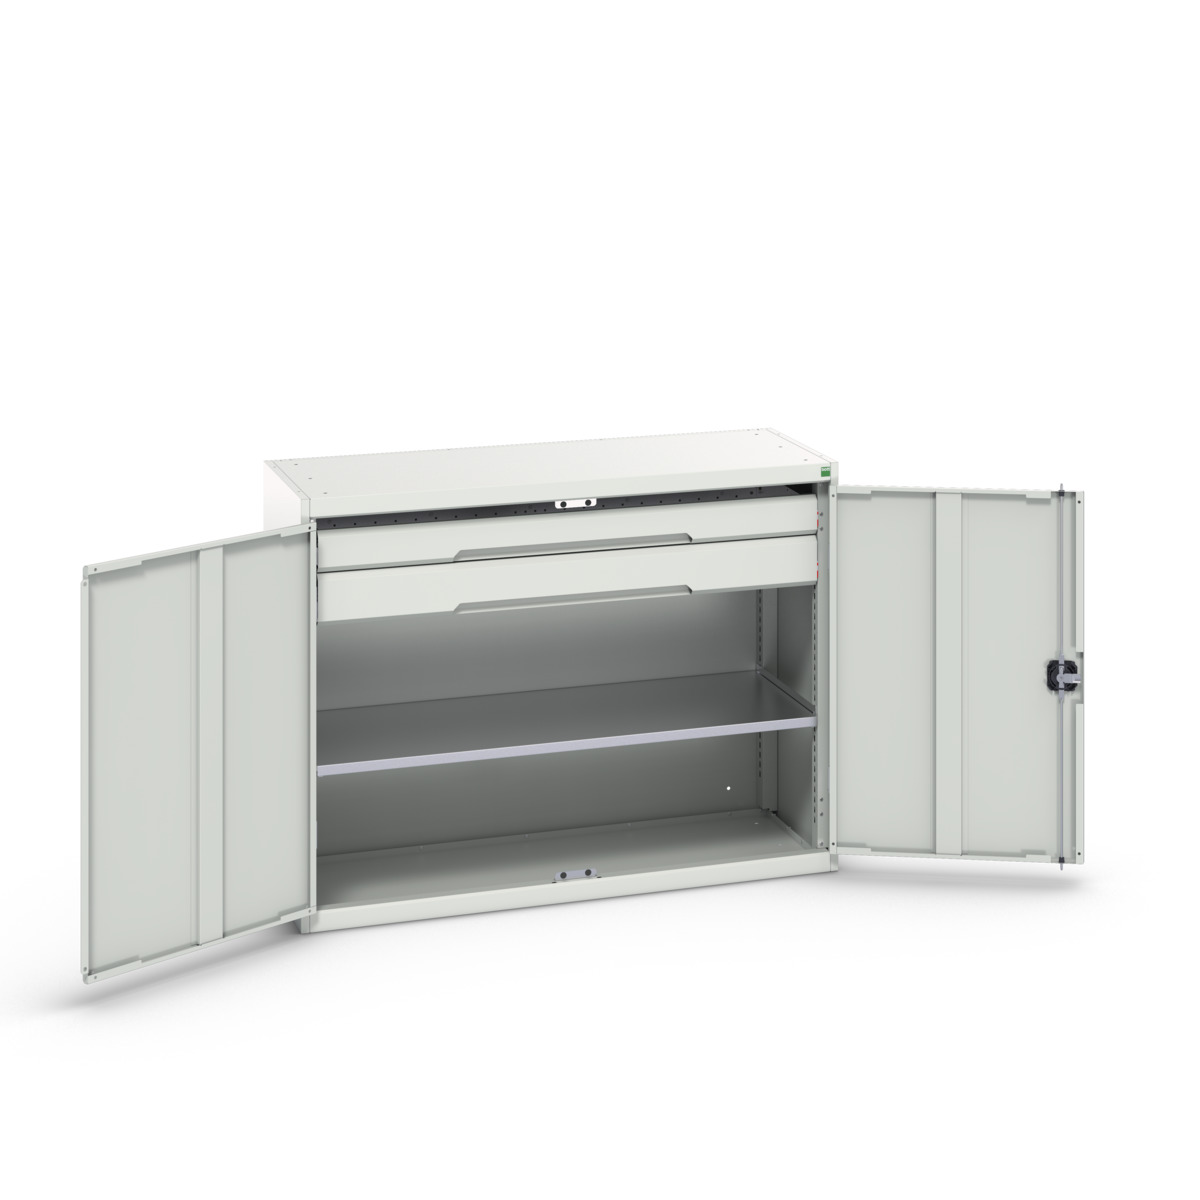 16926605.16 - verso kitted cupboard